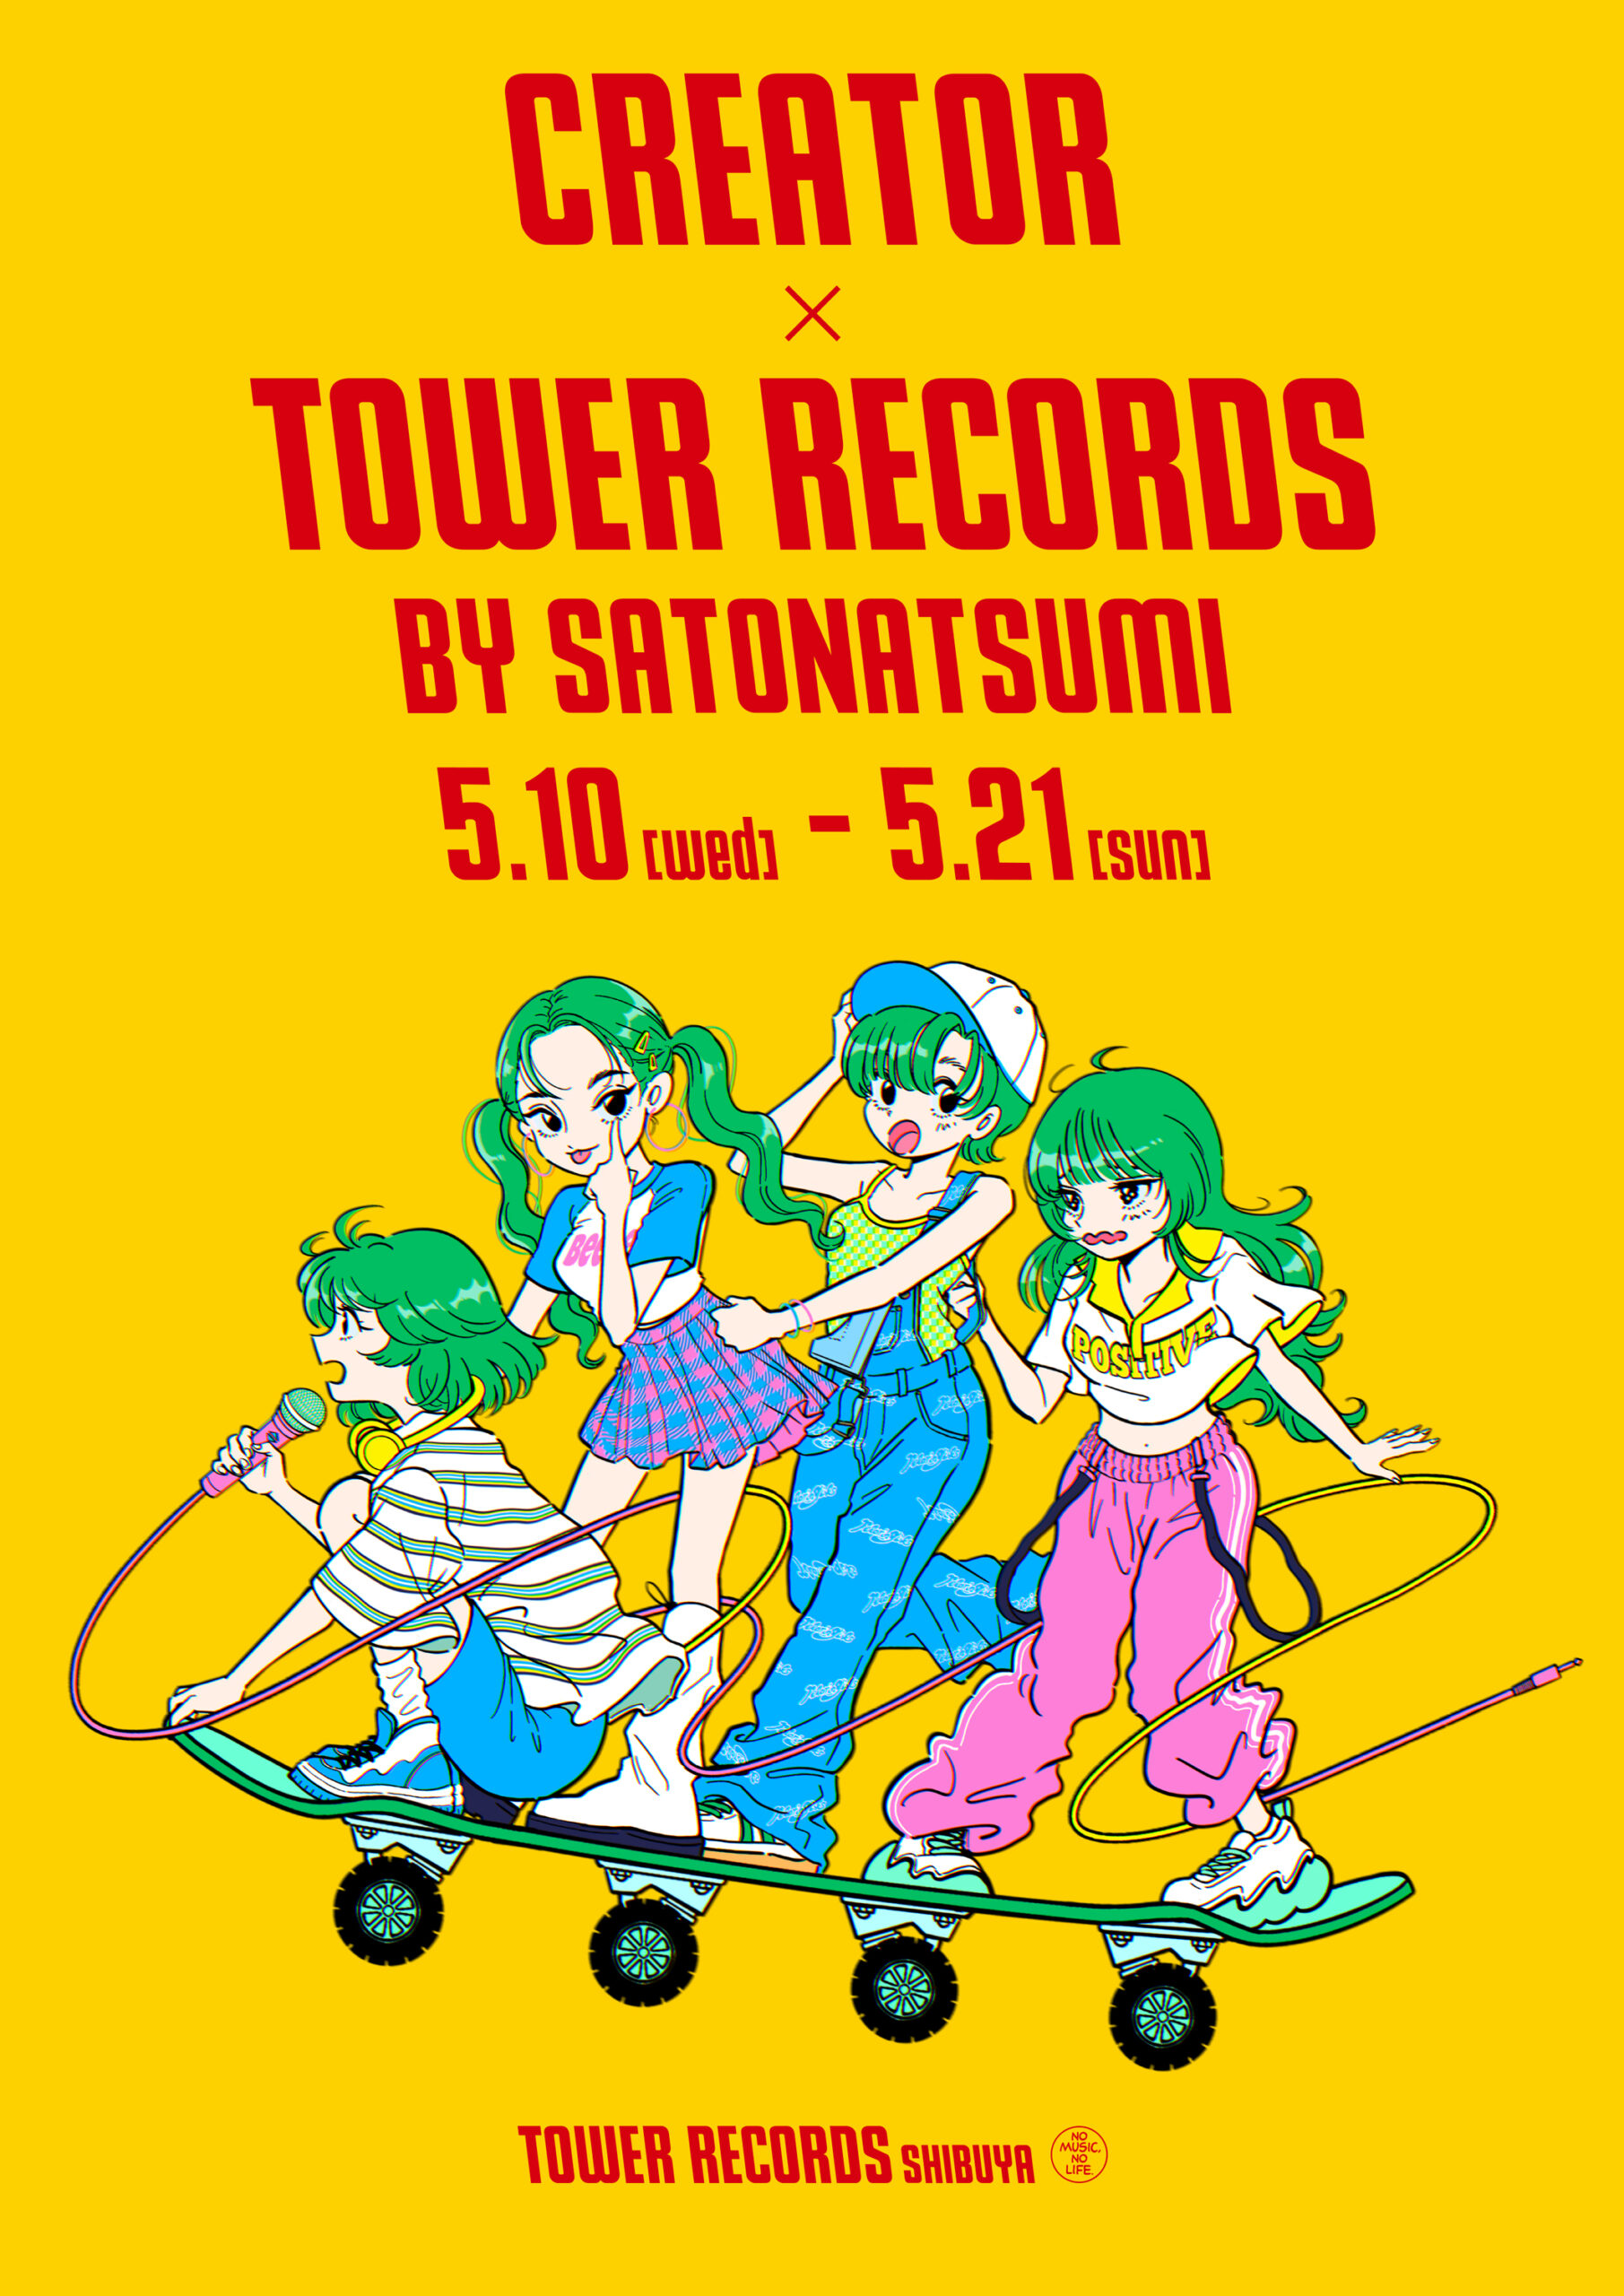 POP UP SHOP「CREATOR × TOWER RECORDS BY SATO NATSUMI」Illustration